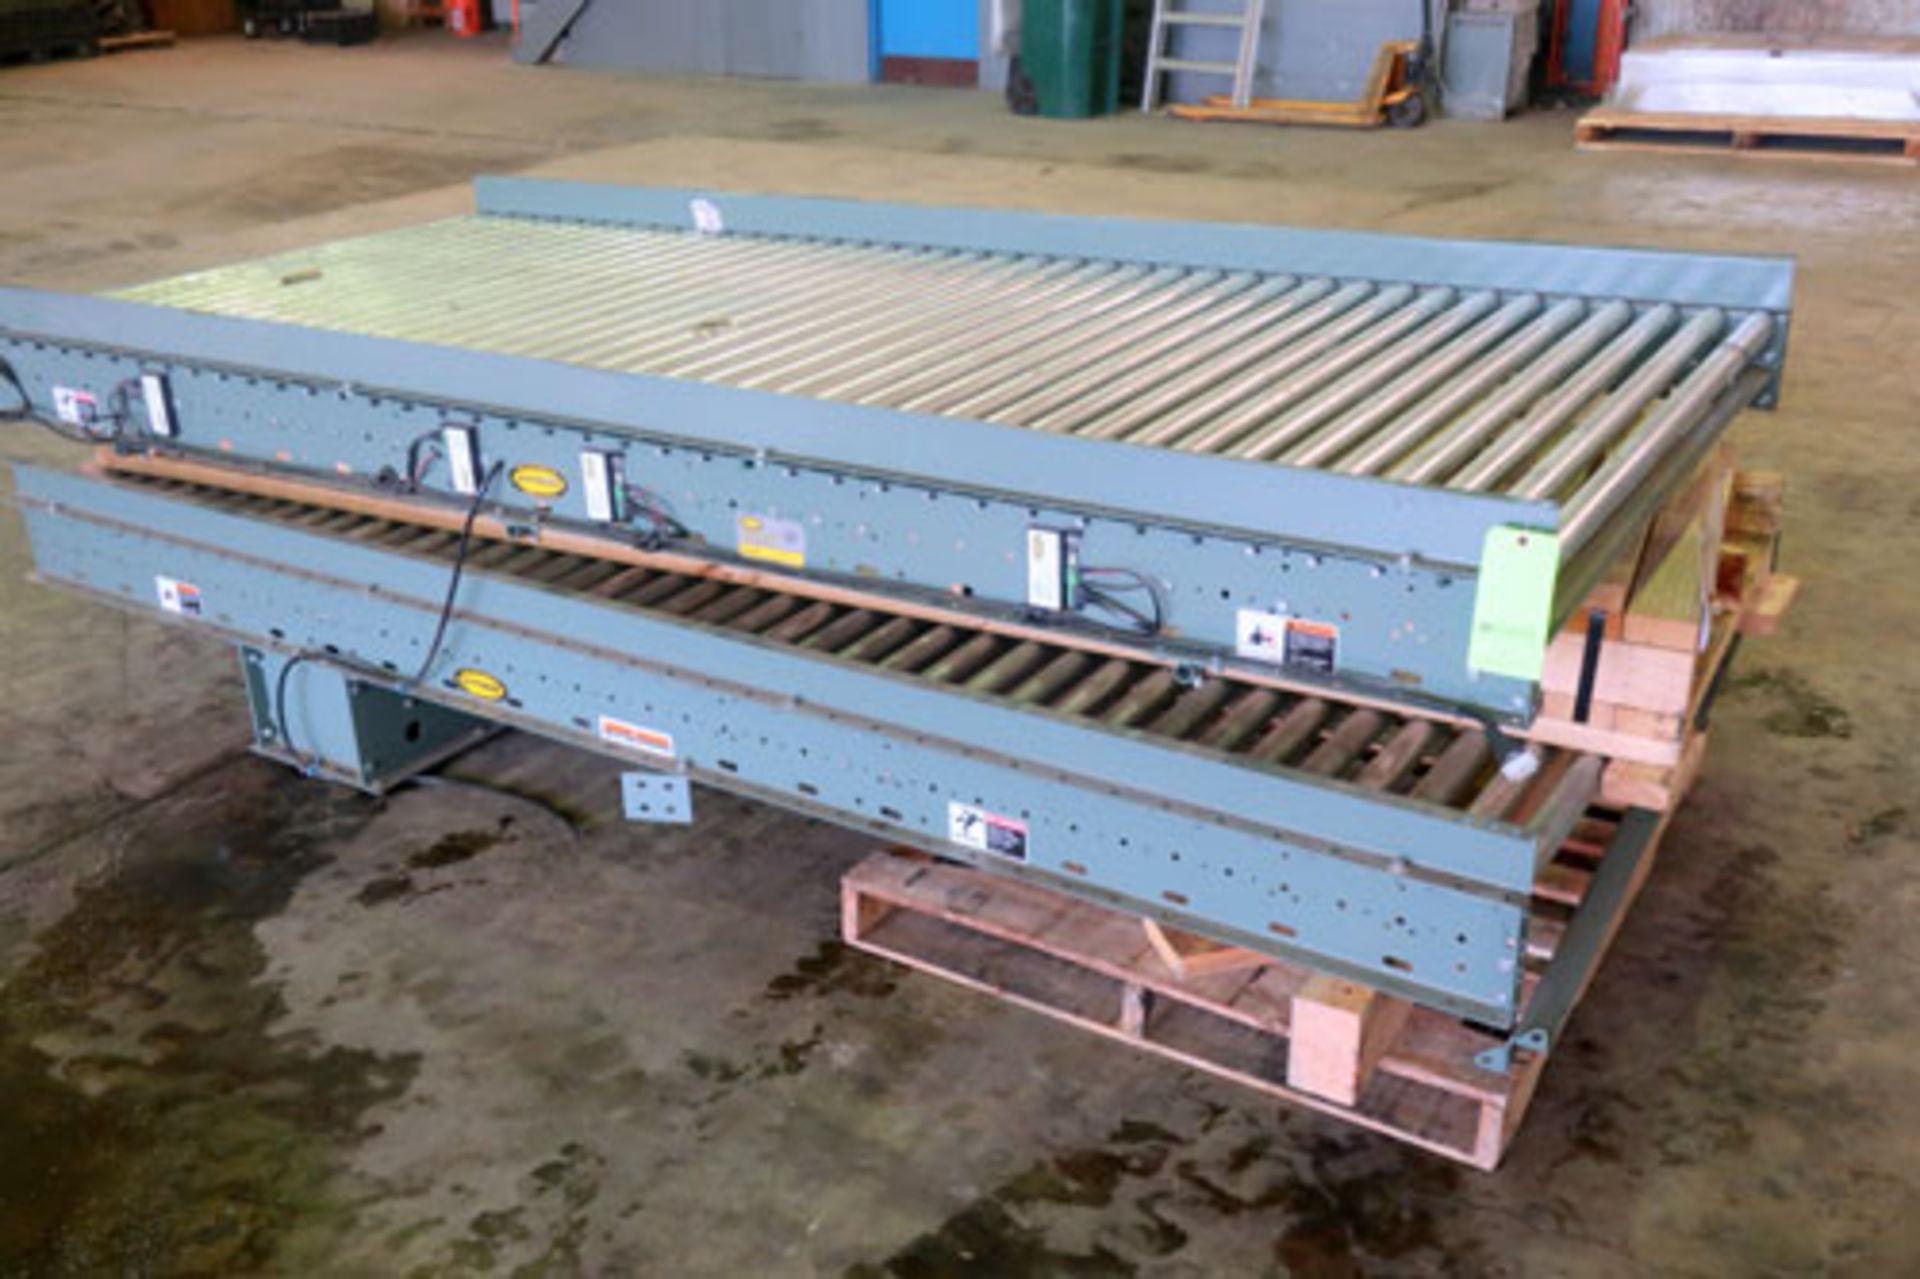 Lot of (2) sections of Hytrol roller conveyor, approximately 52" wide x 10' long.